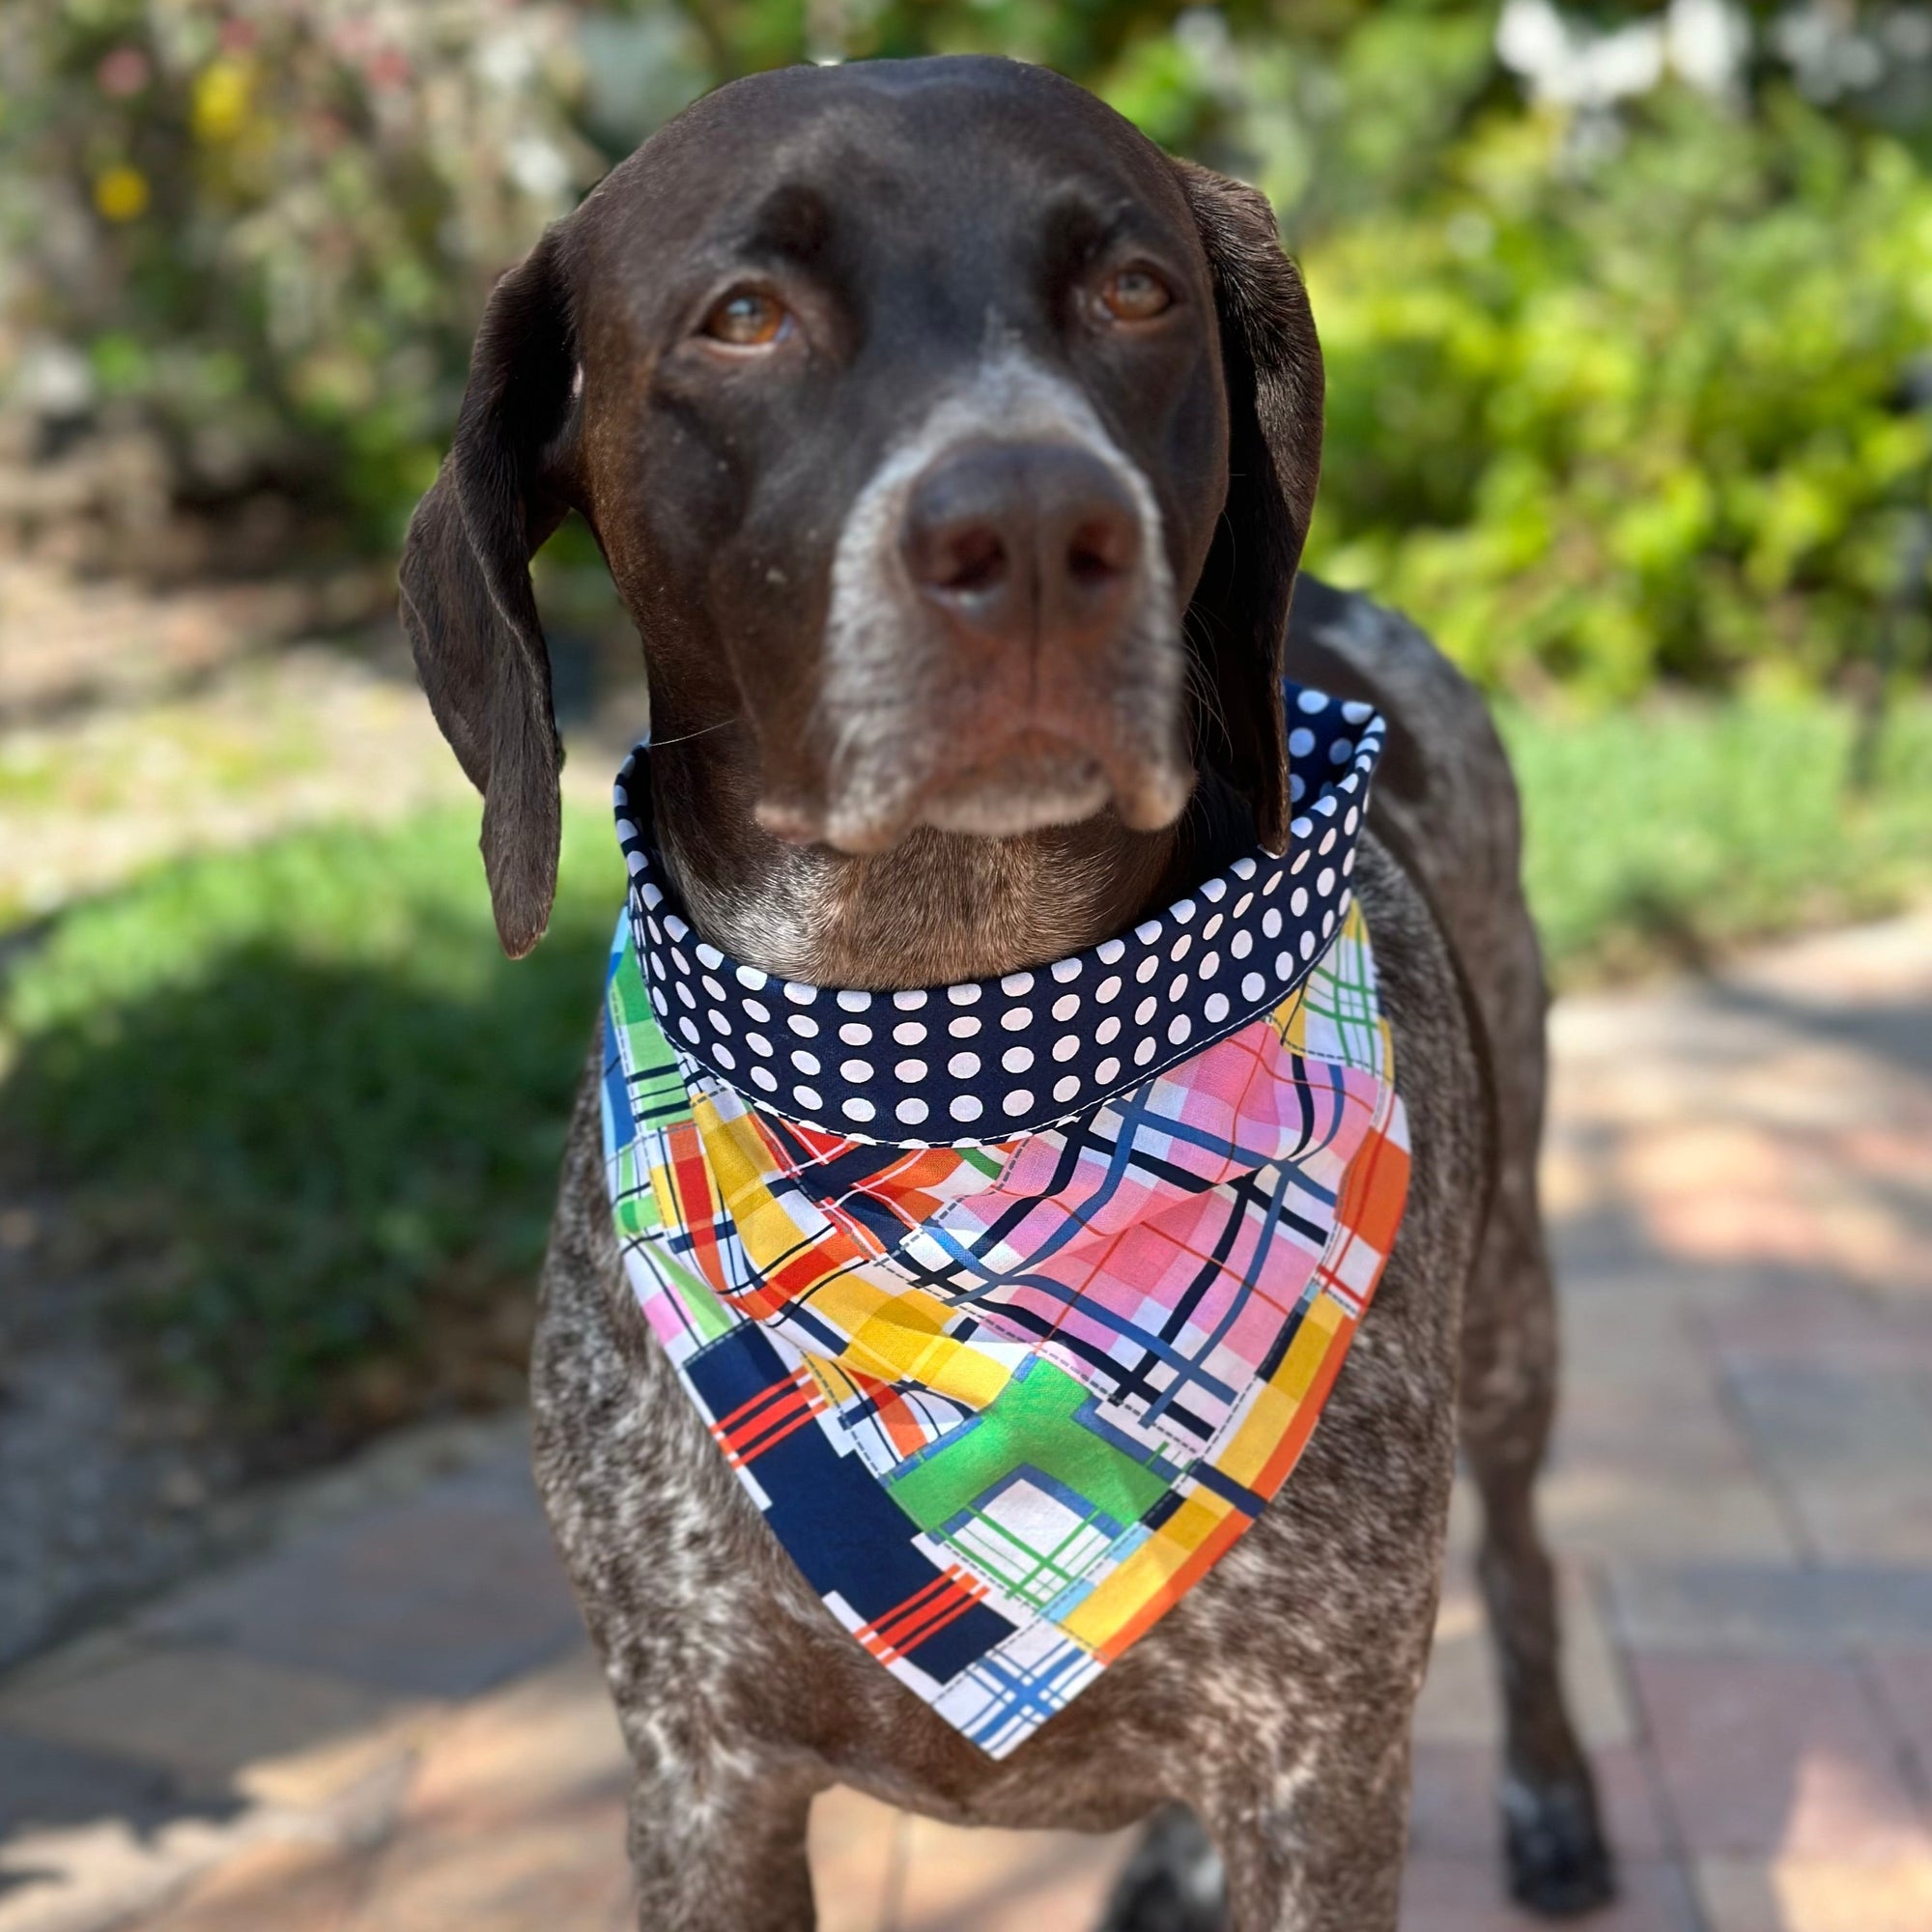 Handmade in the USA by Chloe & Max, this Madras Bandana features bright colorful plaid, with blue and white polka dot trim and backing. 